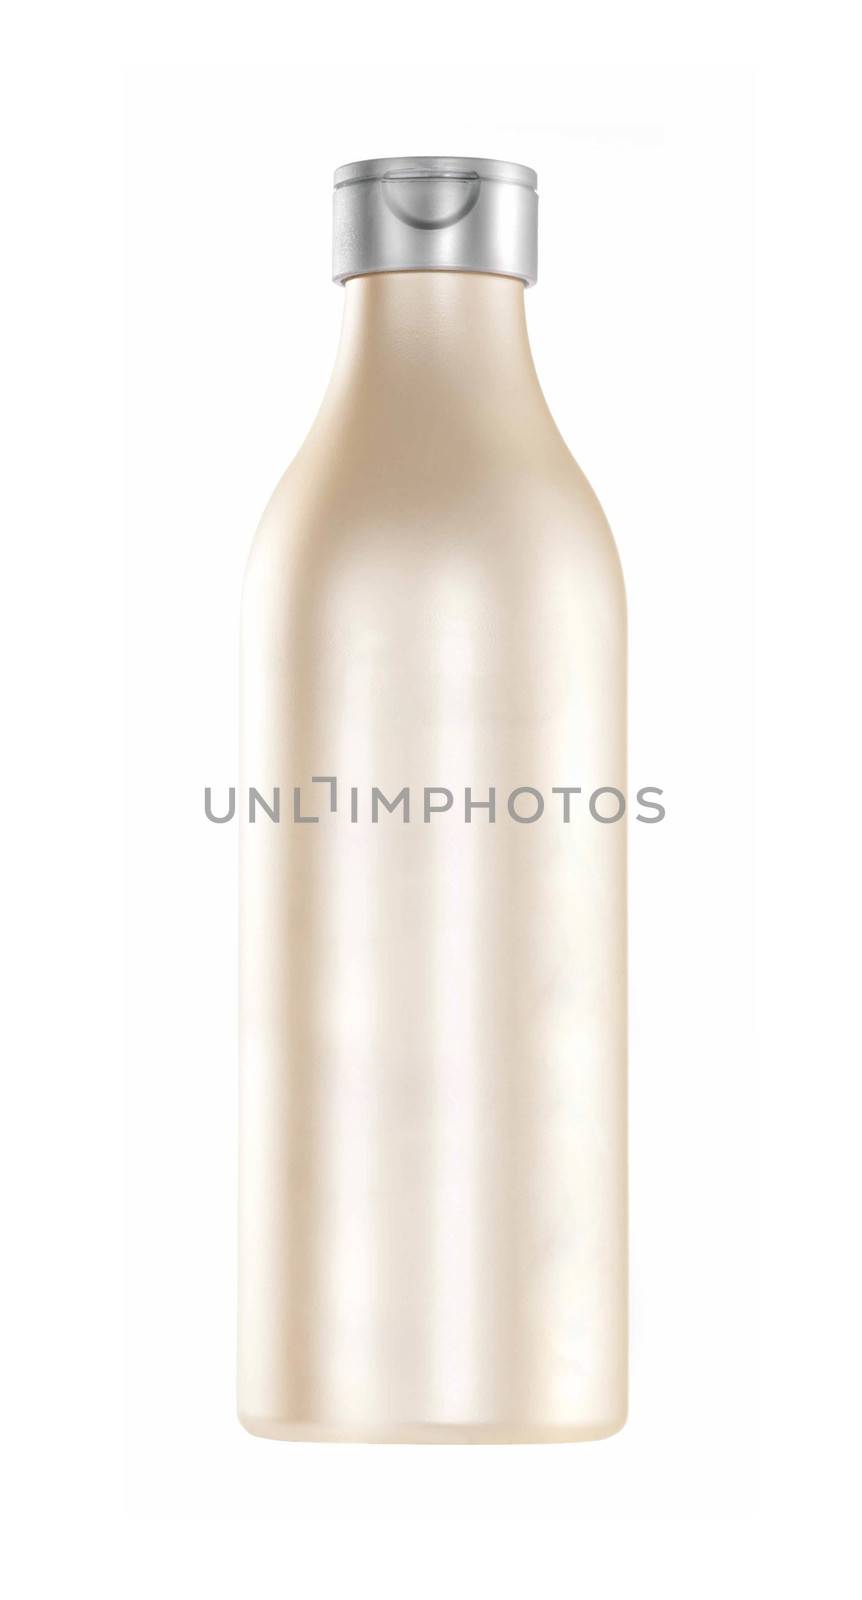 brown shampoo bottle isolated